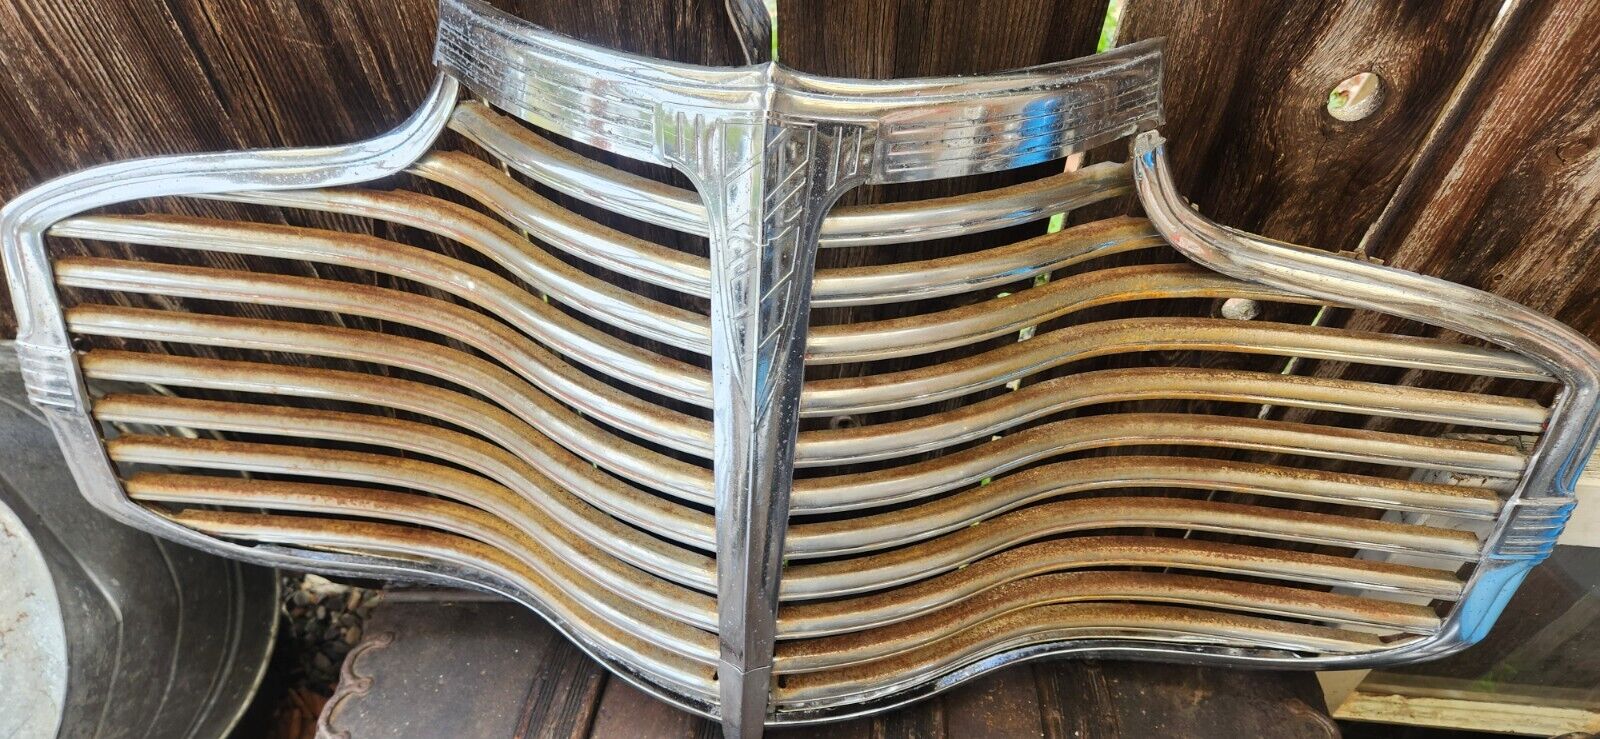 1941 Chevy special deluxe grille with trim